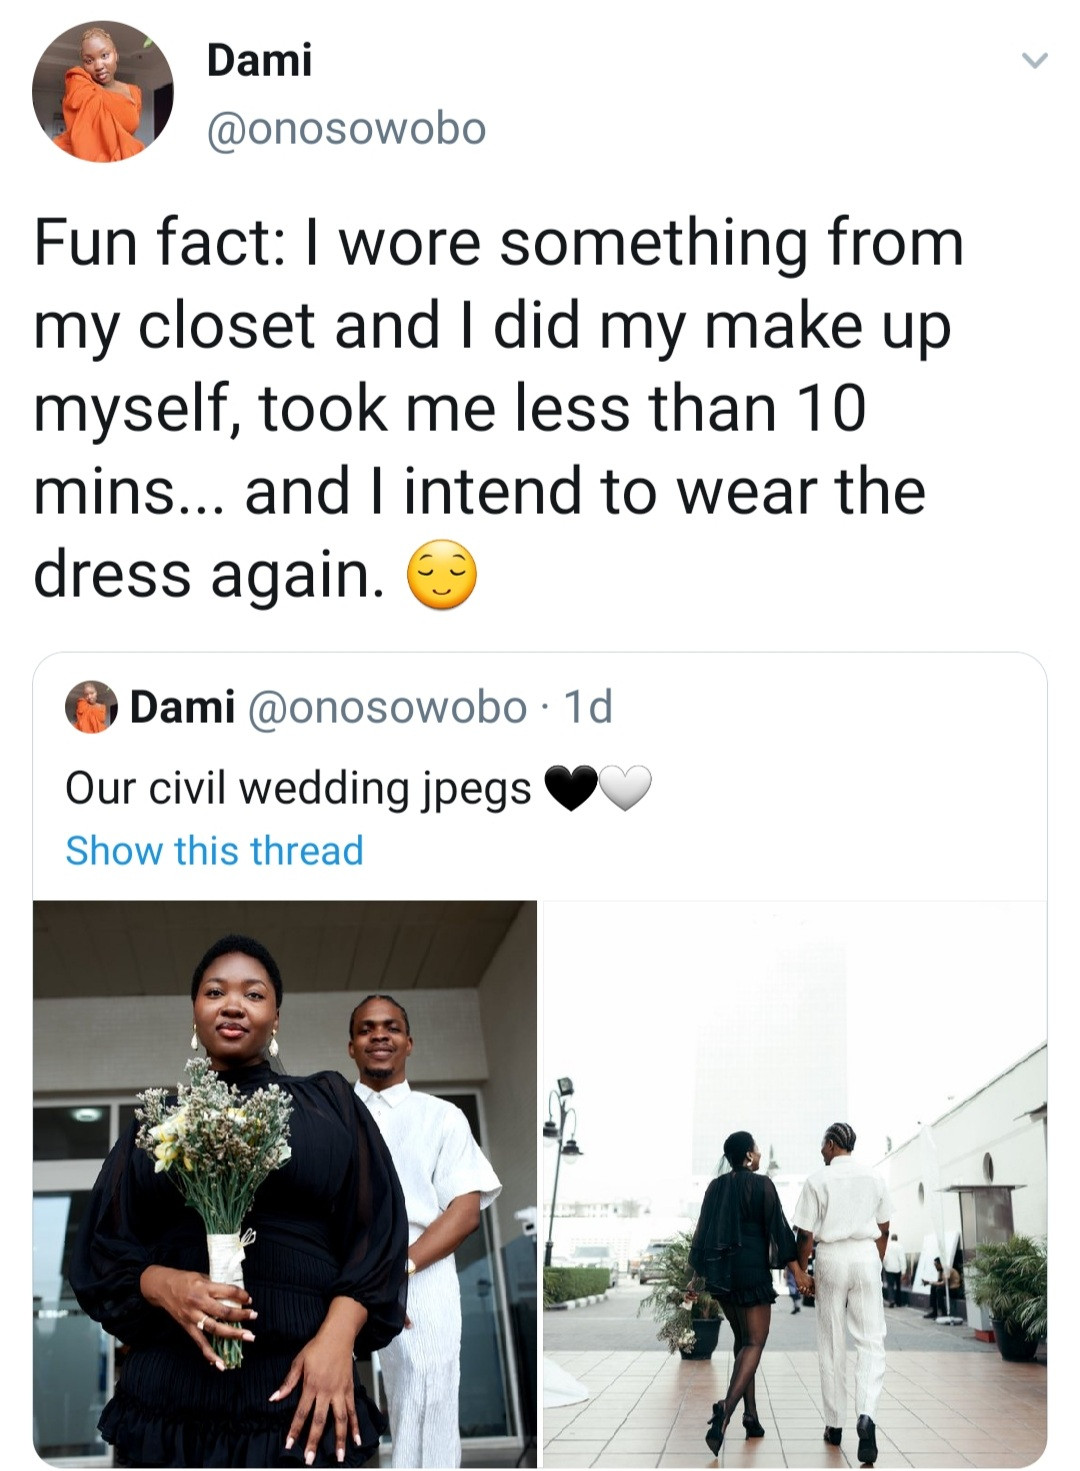 1670203941 958 Nigerian Couple039s Wedding Photos Go Viral After The Bride Wore